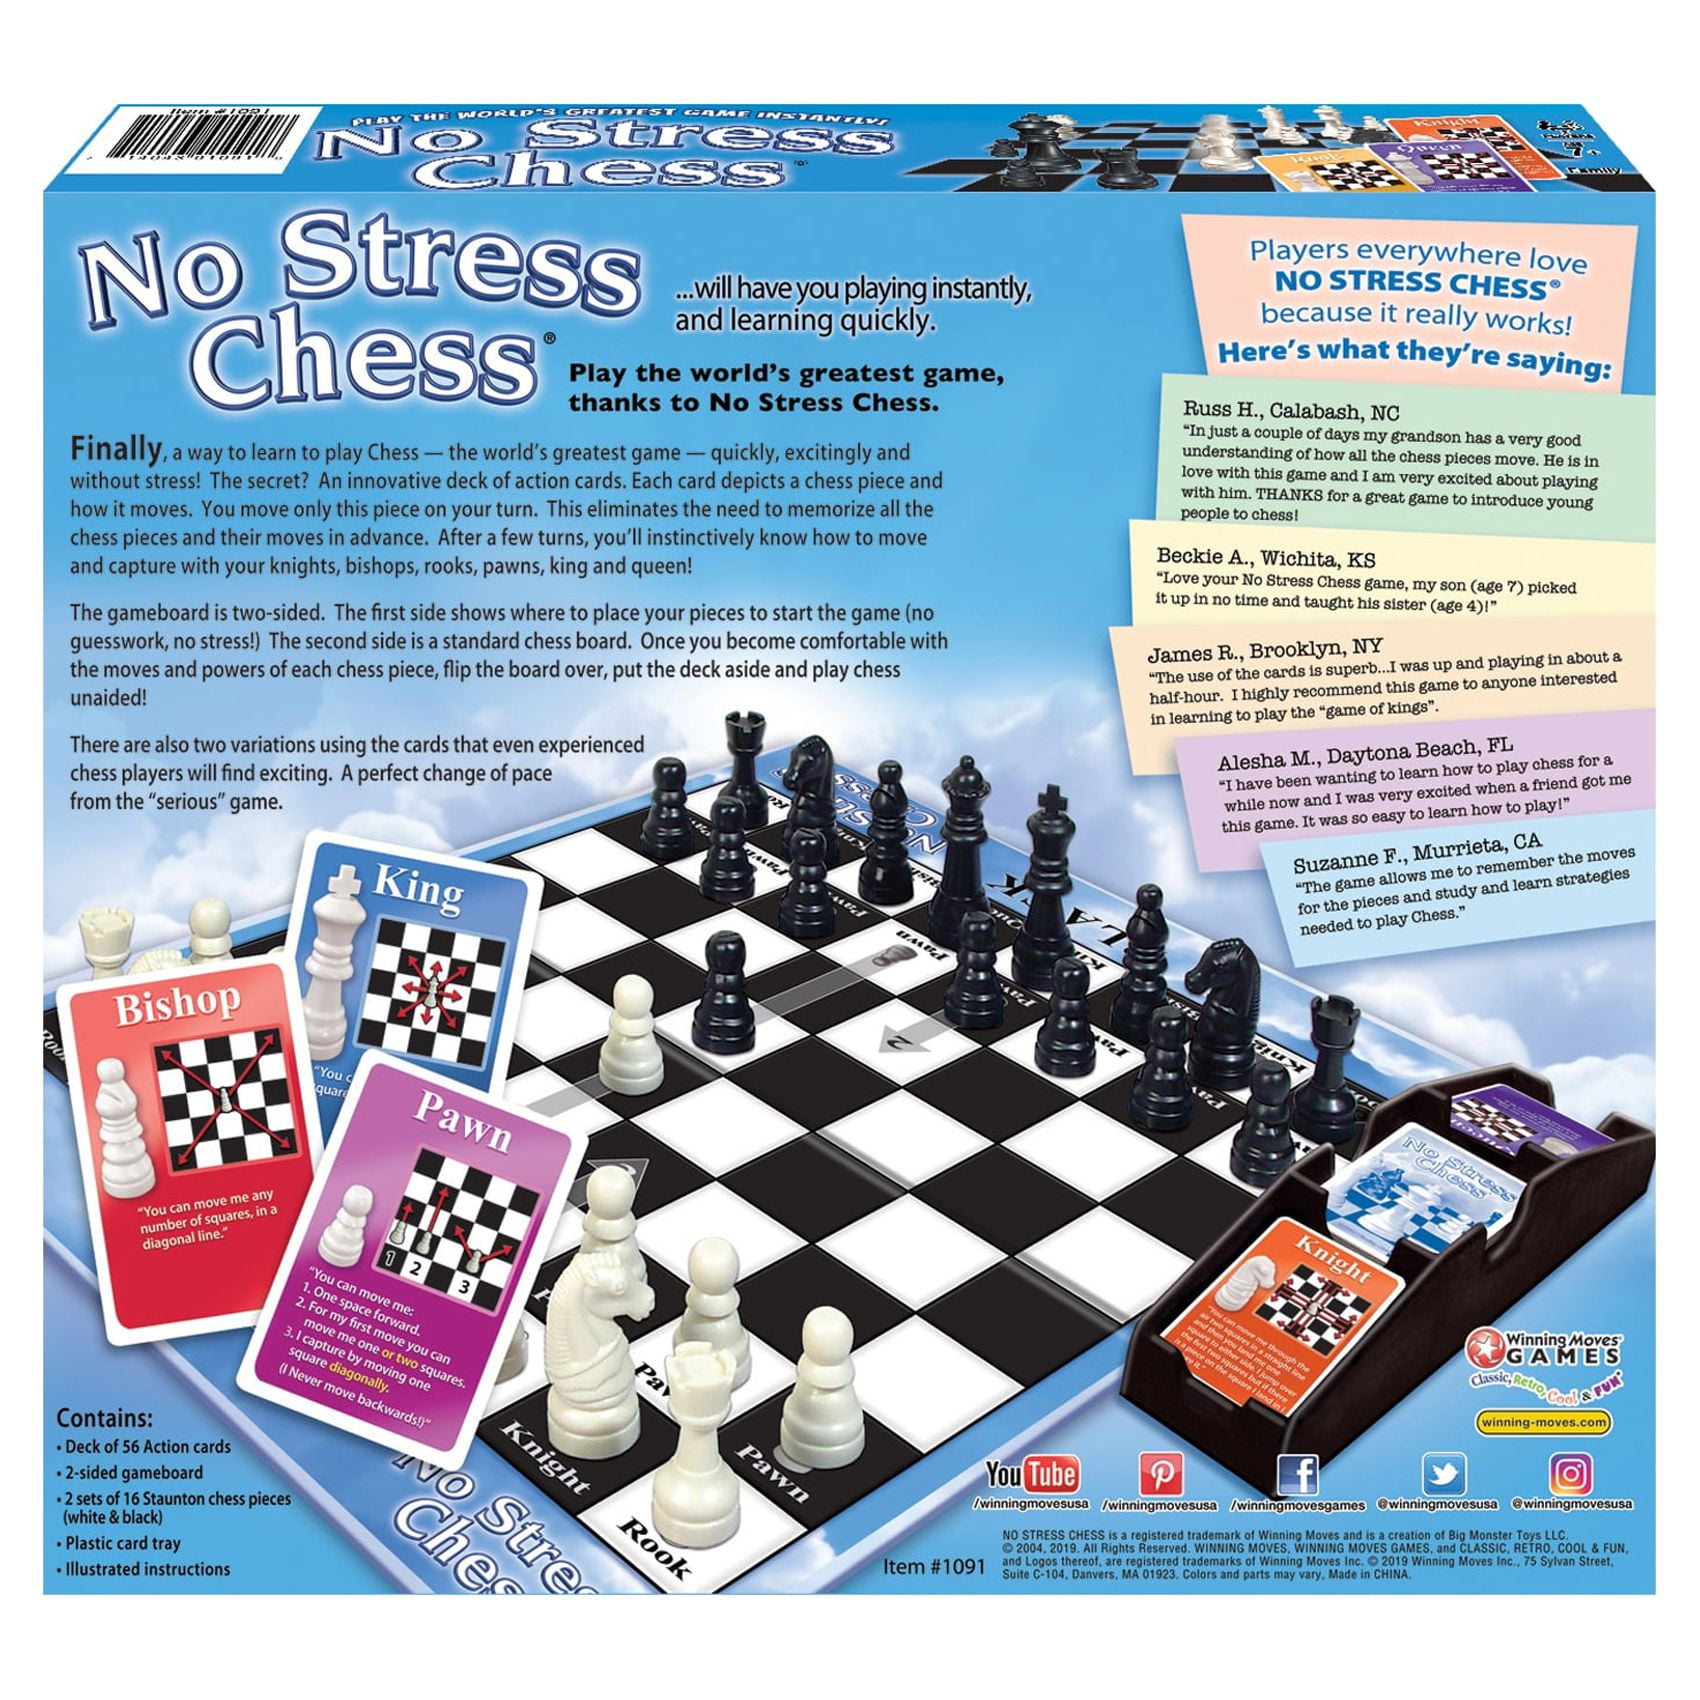 Chess Piece Moves  Chess moves, Learn chess, How to win chess